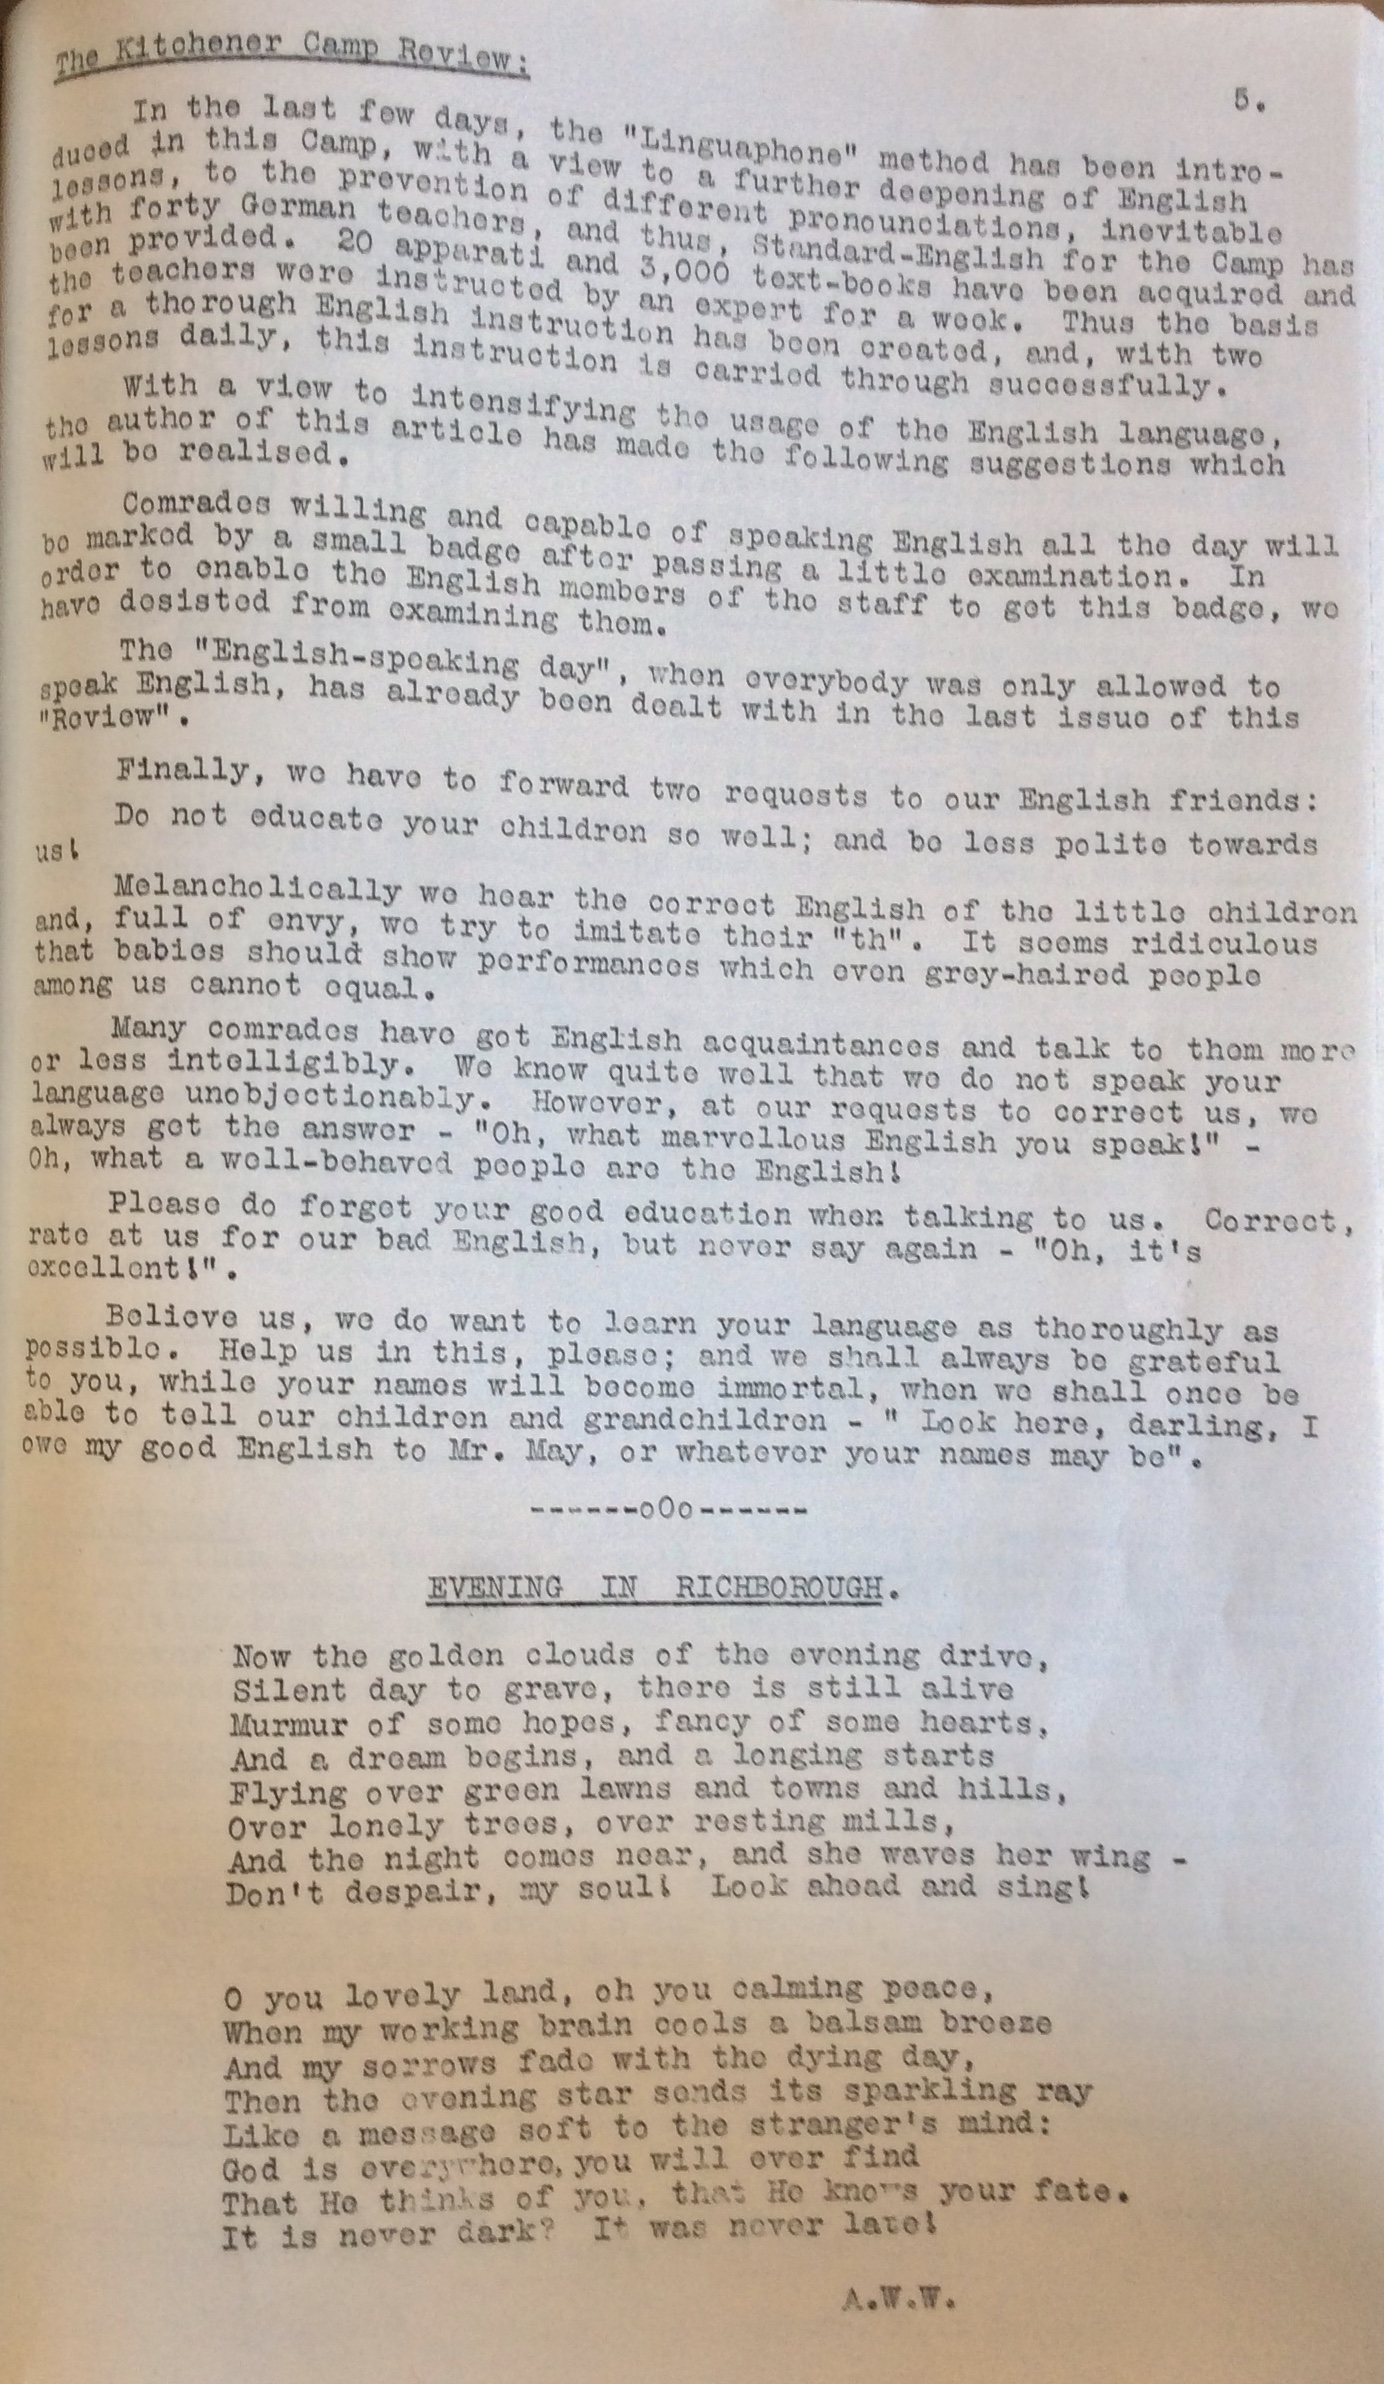 The Kitchener Camp Review, July 1939, No. 5, page 5